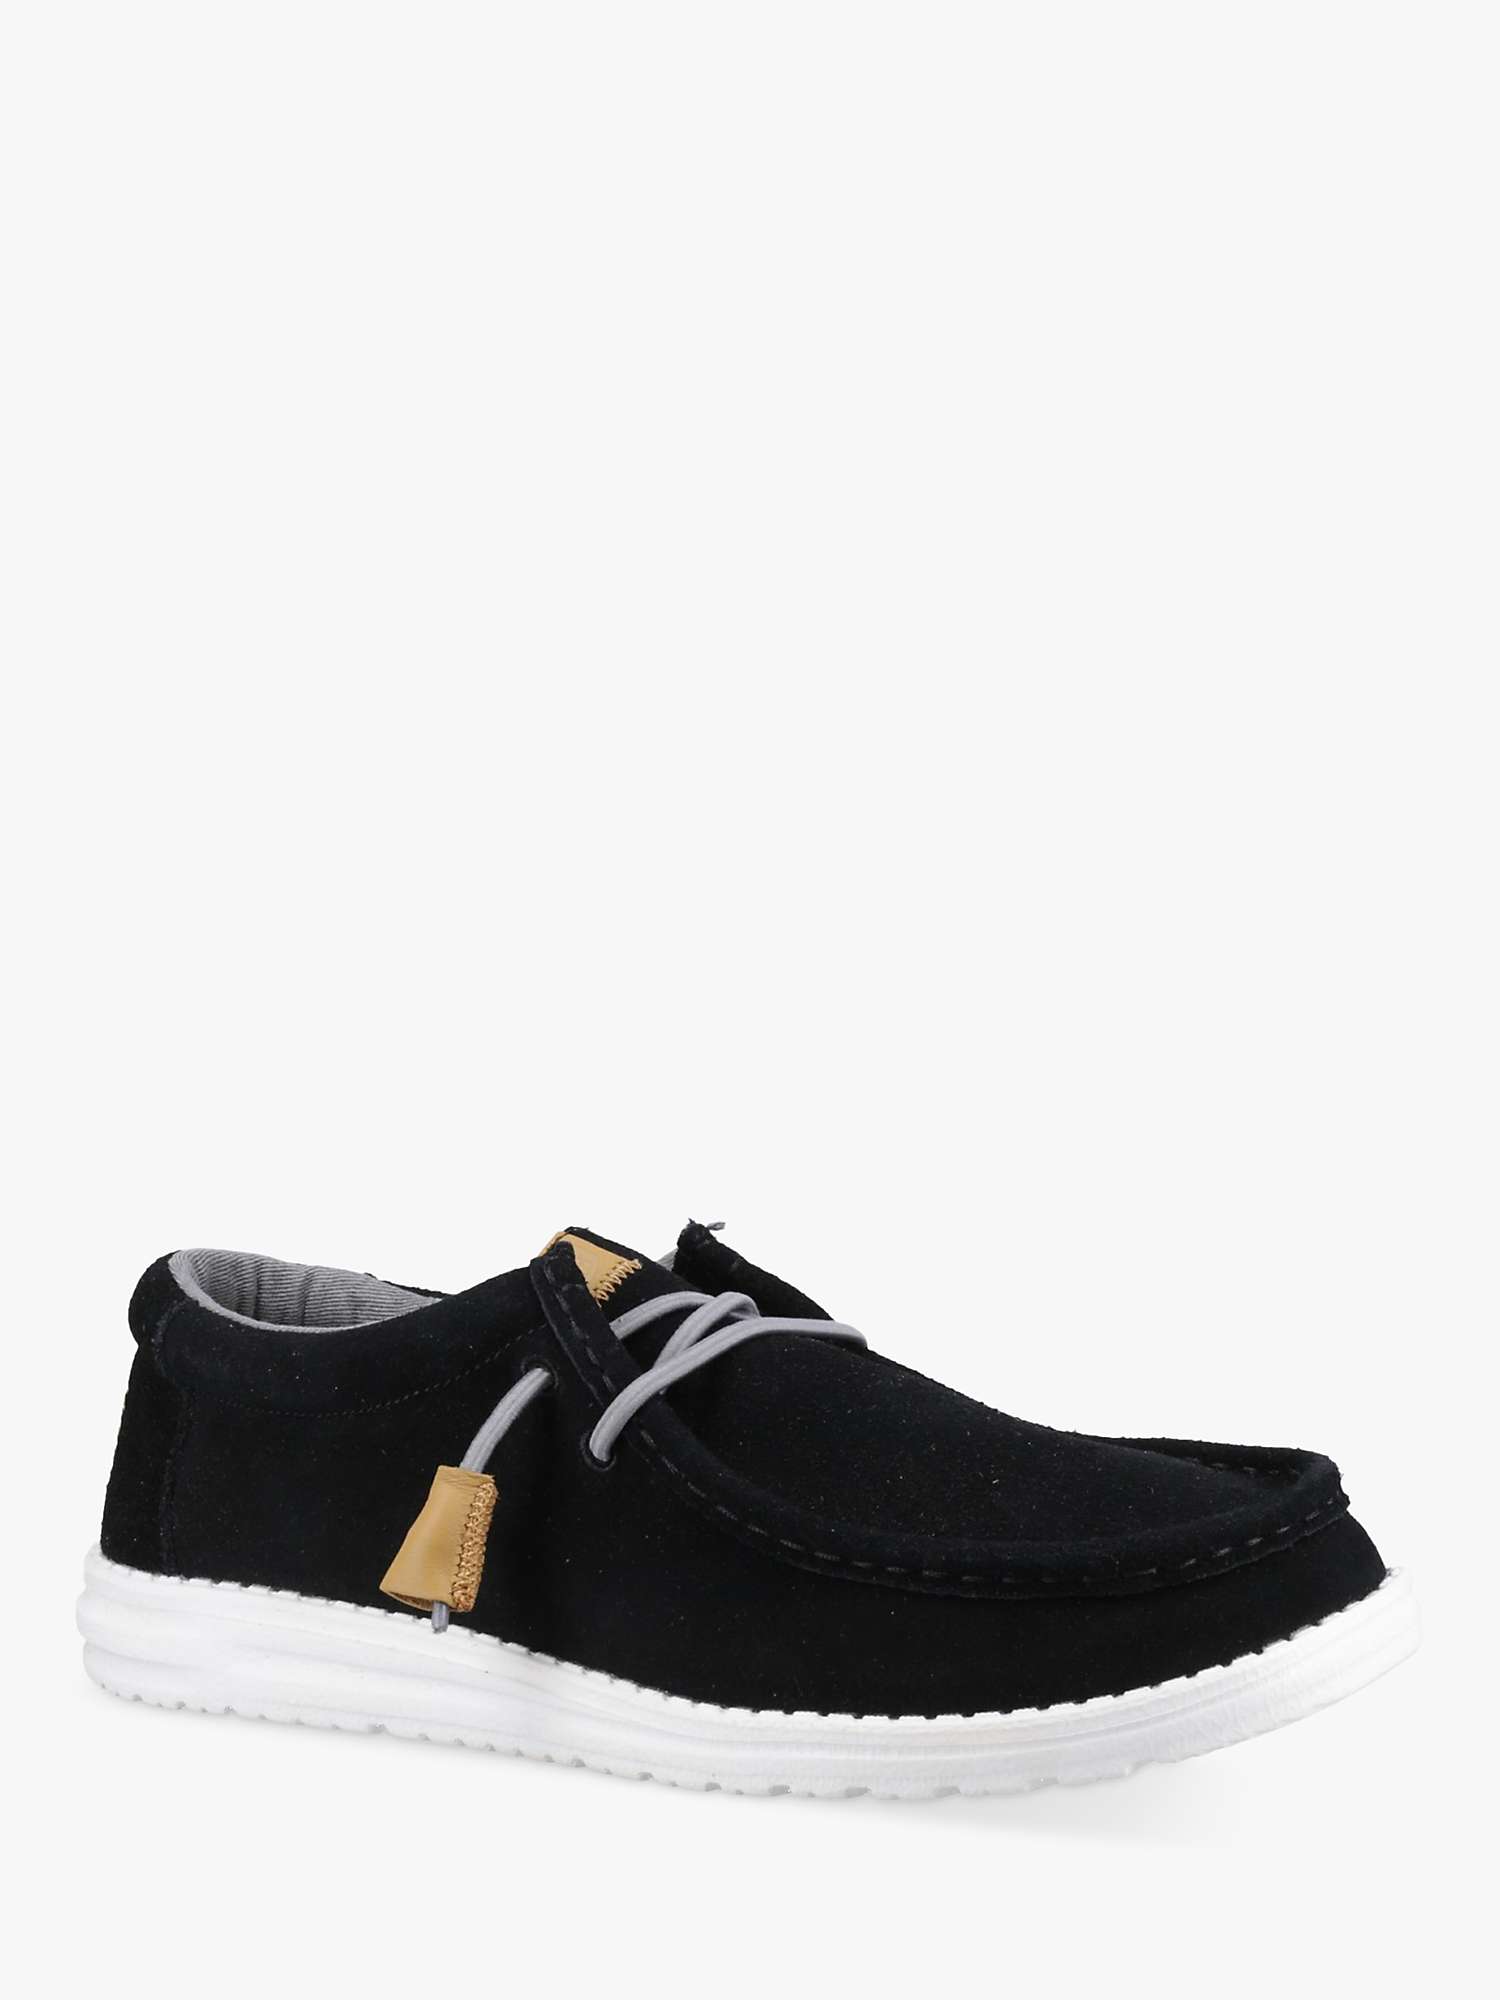 Buy Hey Dude Wally Craft Suede Lace-Up Shoes, Black Online at johnlewis.com